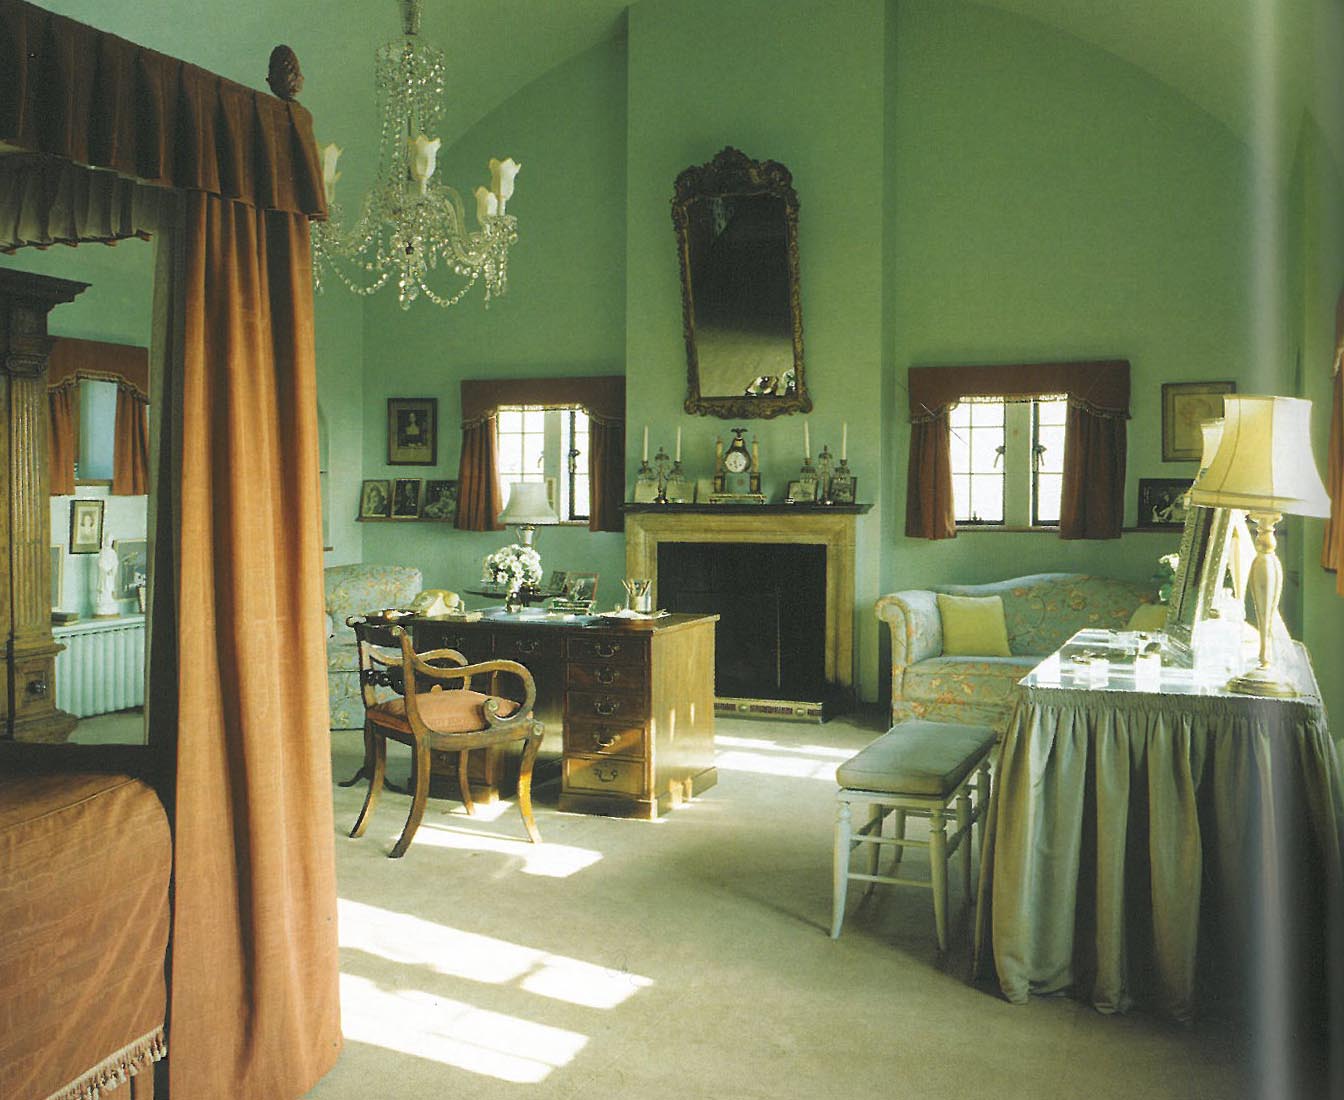 Lady Churchill's Bedroom is on the top floor of the 3-storey addition, on the south side of the House. The barrel-vaulted ceiling is painted the same duck egg blue color that coats the walls. Churchill called this room his wife's "magnificent aerial bower." Image courtesy of The National Trust.